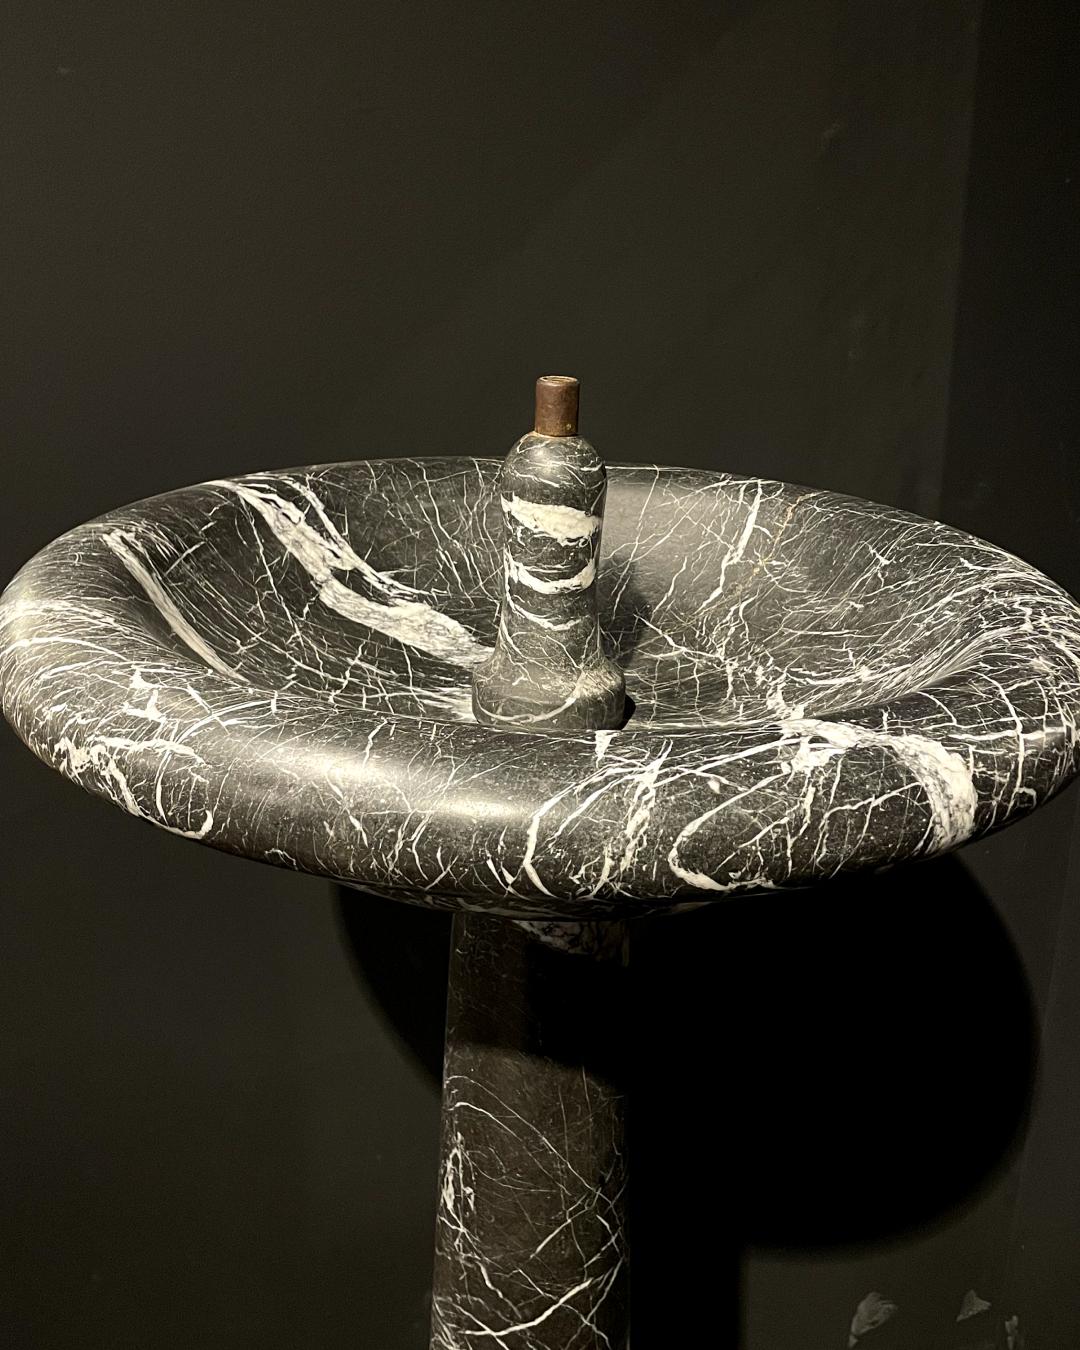 Transport your surroundings to the refined splendor of the 19th century with our Black and Grey Marble Fountain. Crafted with meticulous attention to detail, this exquisite piece captures the essence of timeless elegance. The marble, characterized